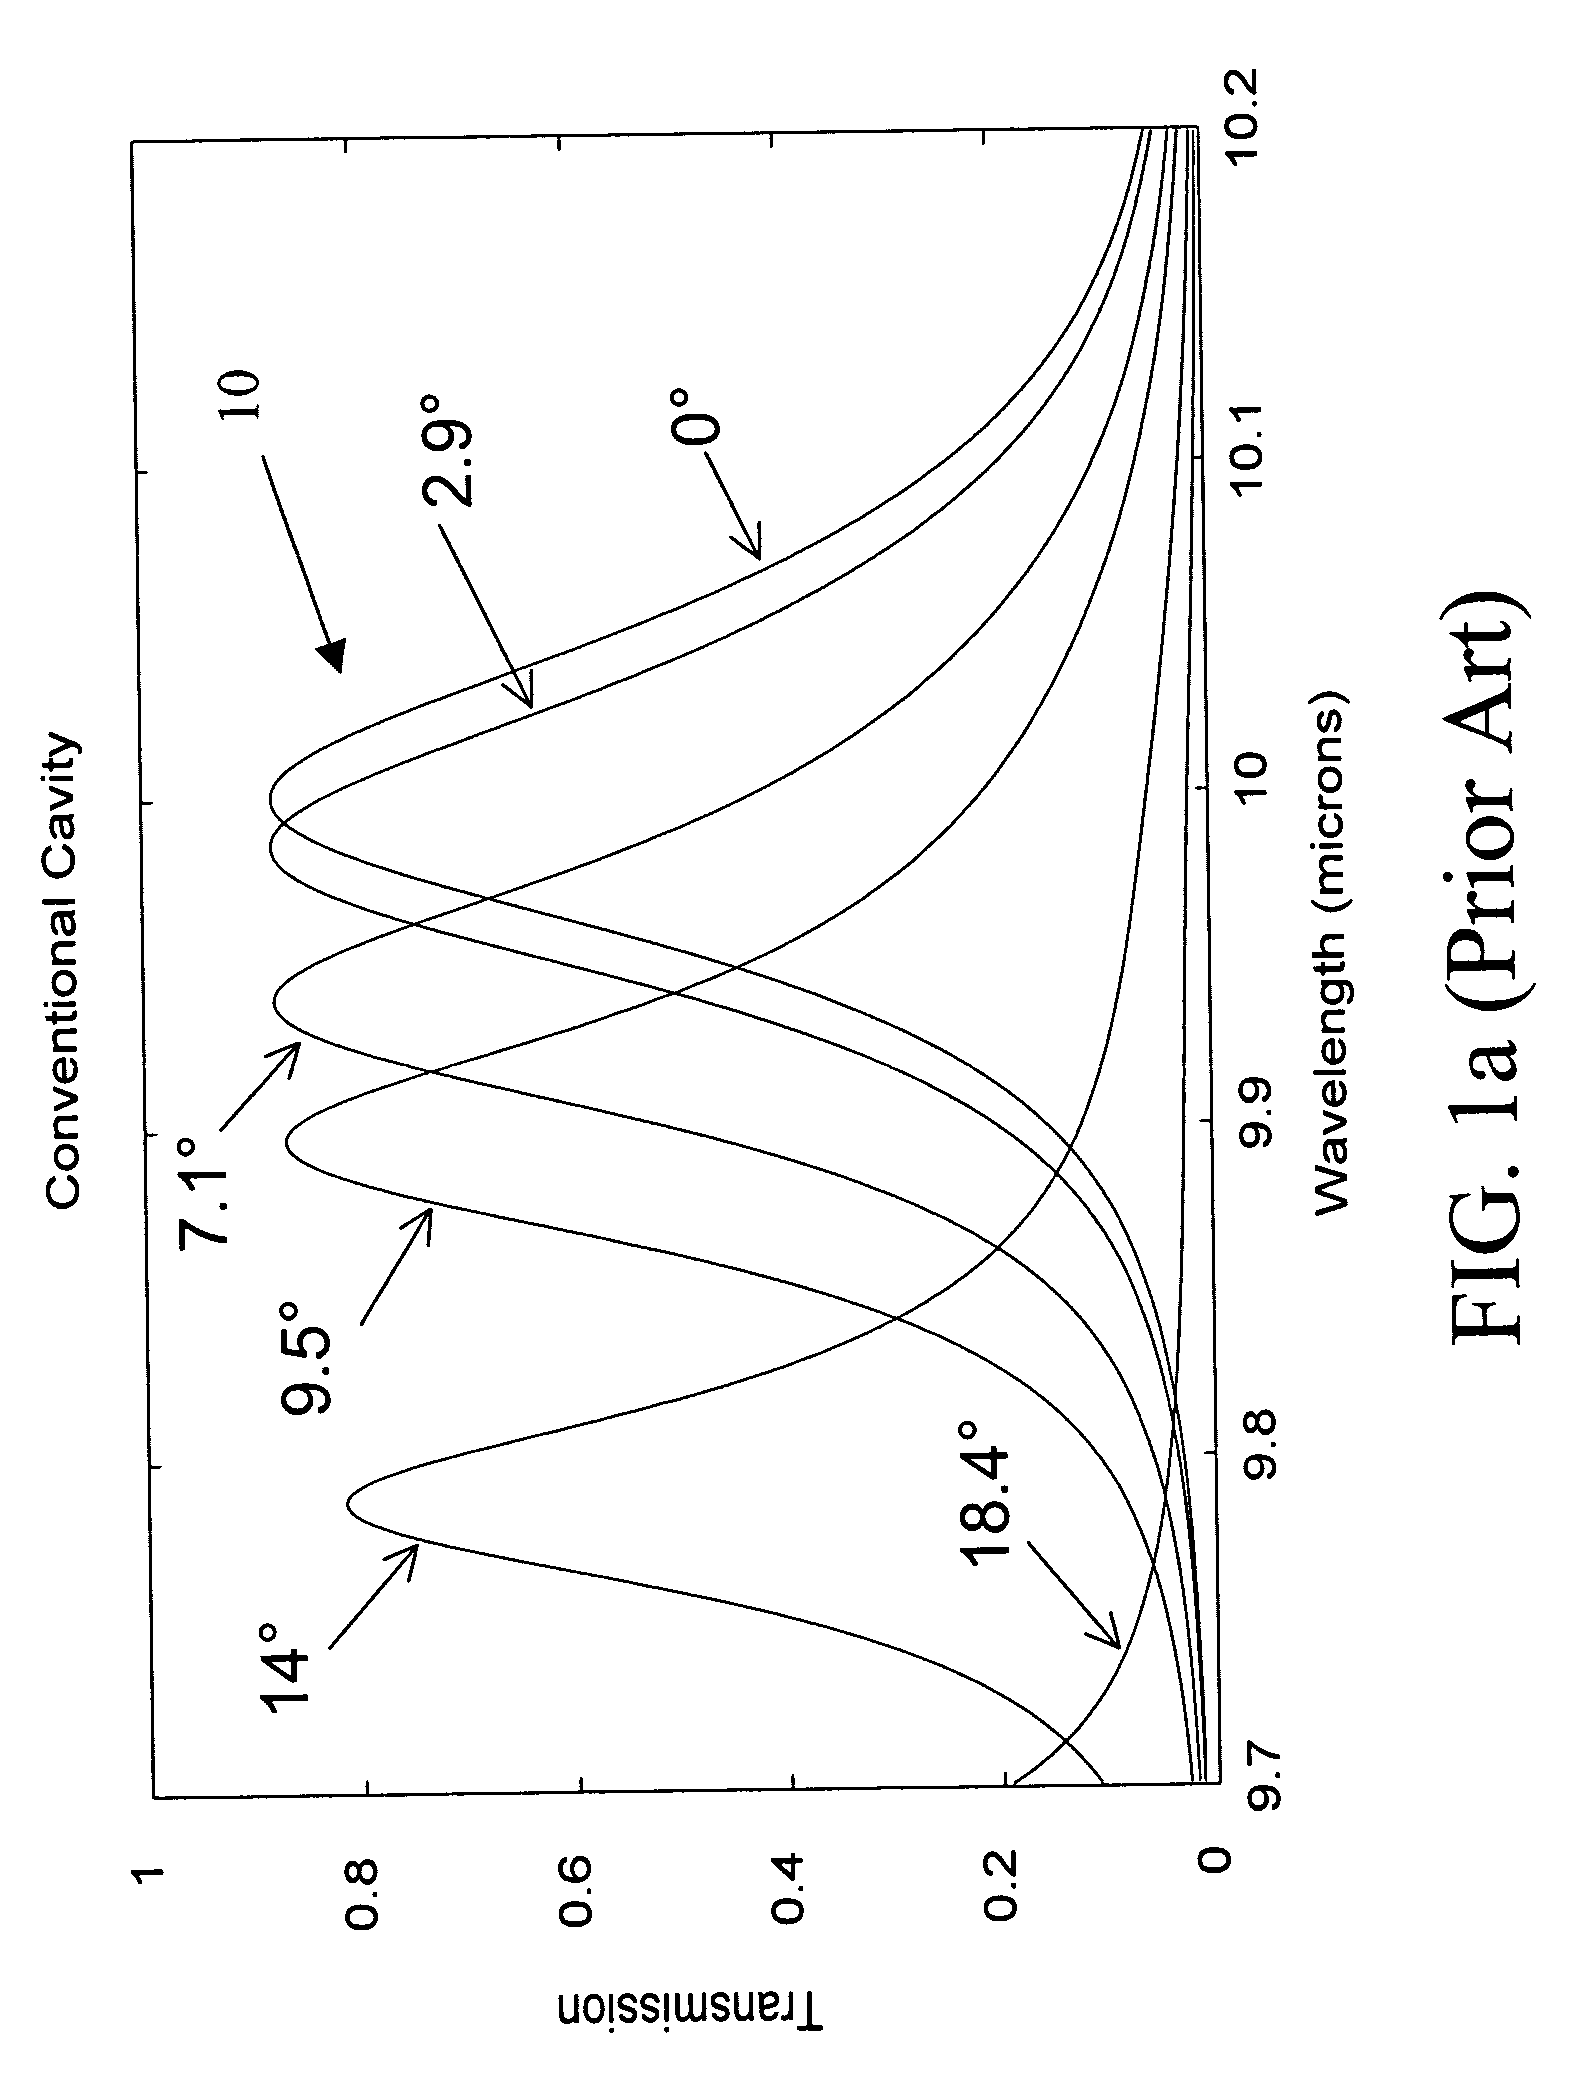 Partitioned-cavity tunable fabry-perot filter